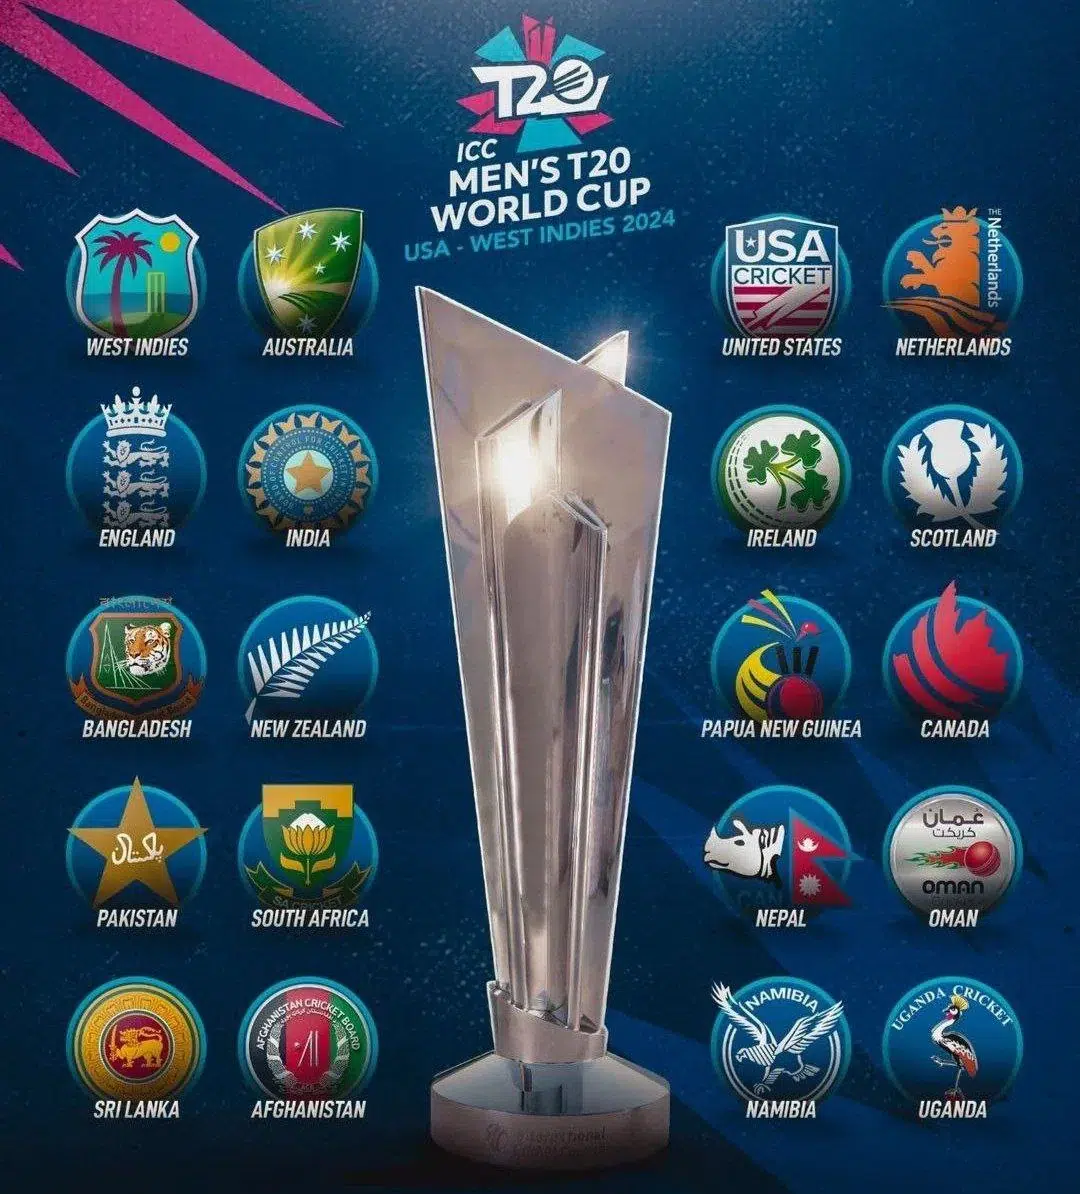 Qualified team for T20 World Cup 2024